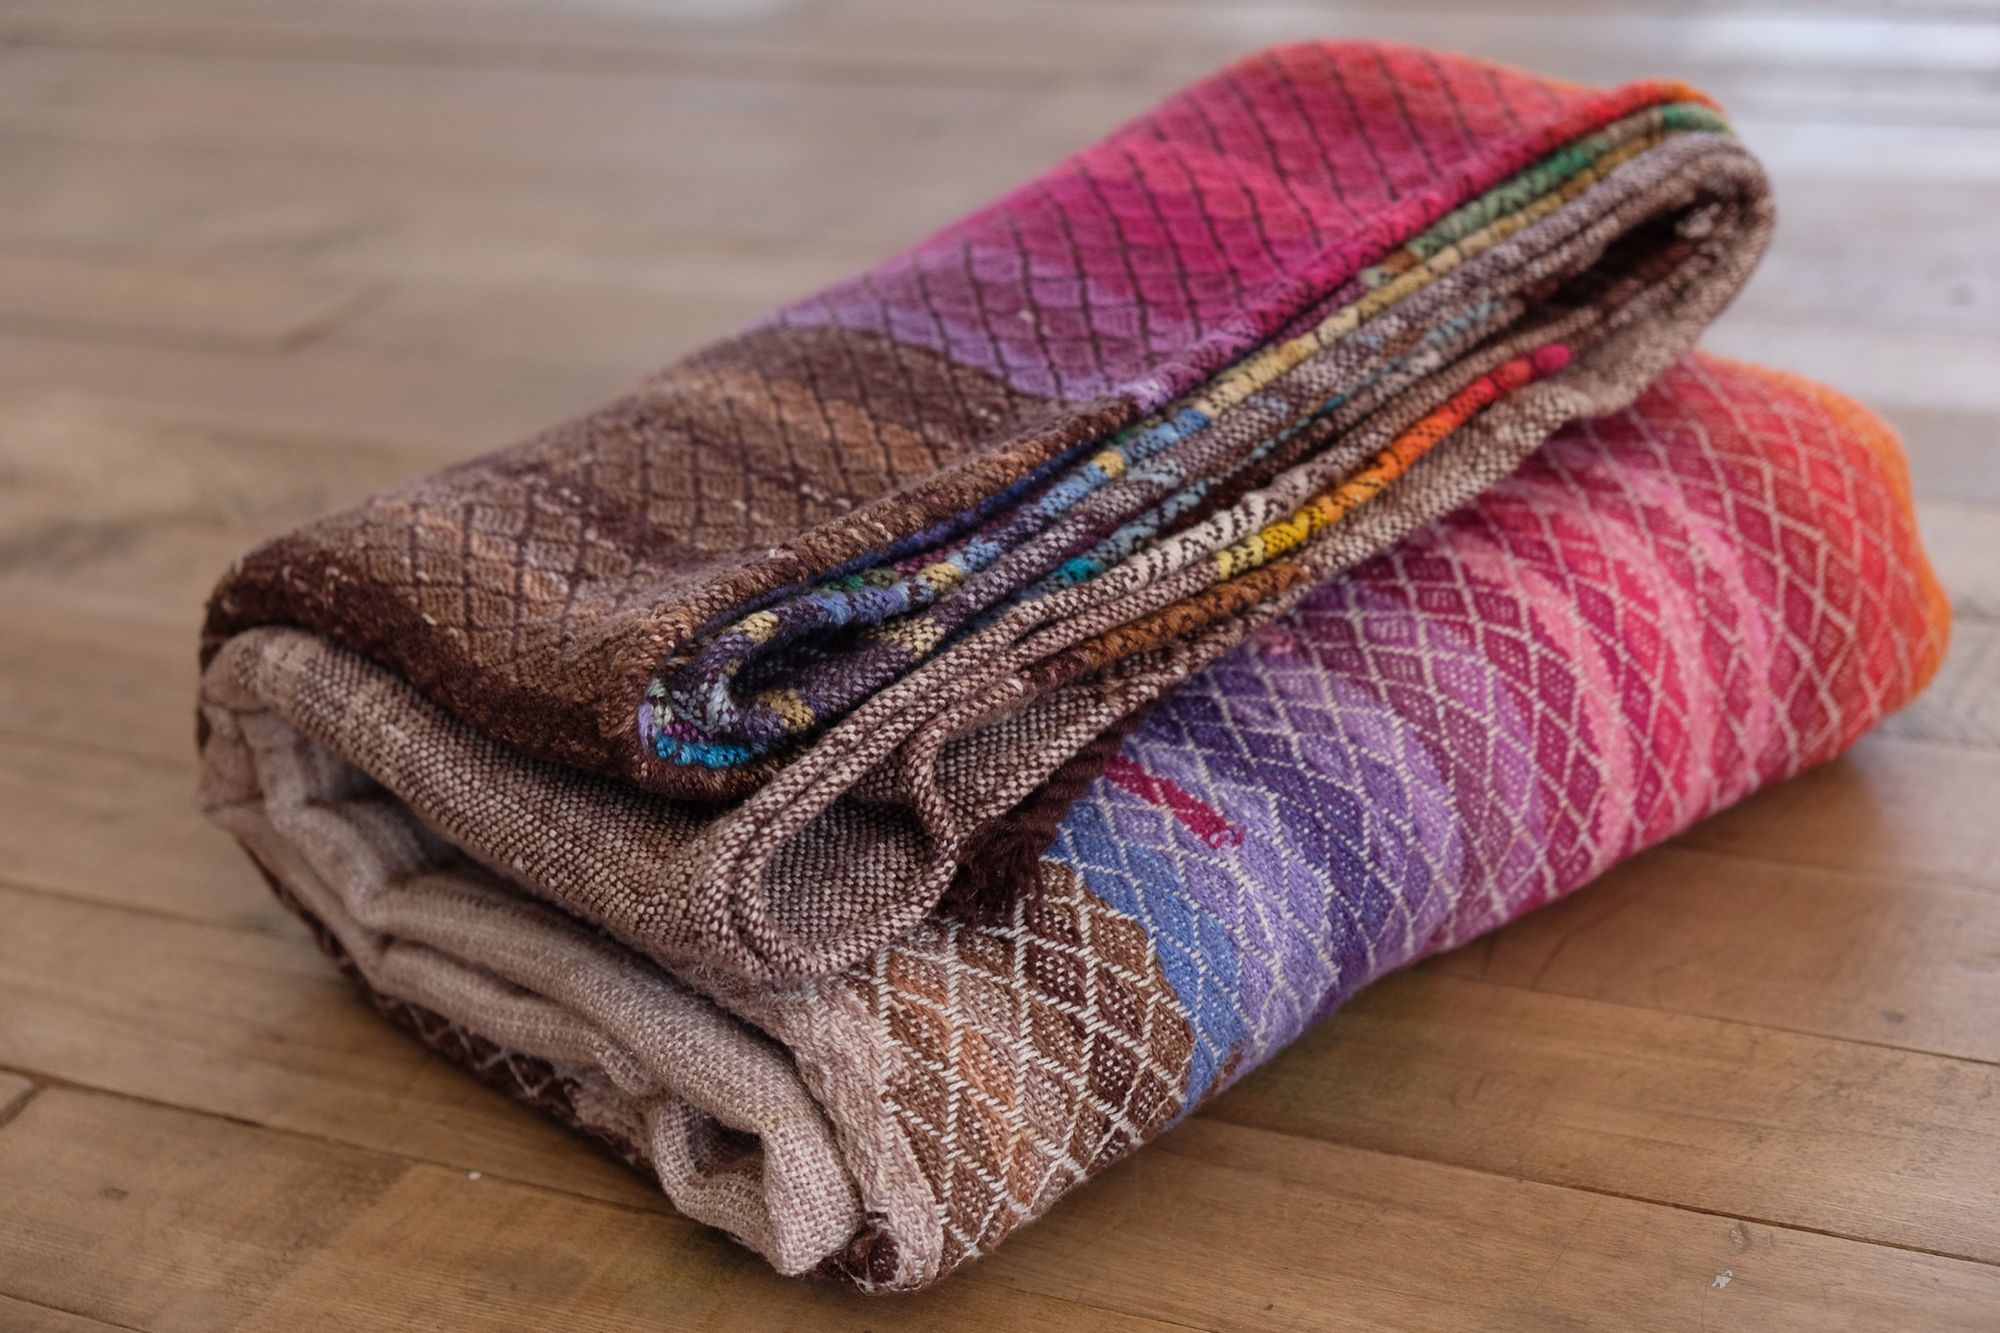 folded on a wooden floor Handwoven, highly textures Diamond pattern fabric in every color of the rainbow, with natural browns and tans